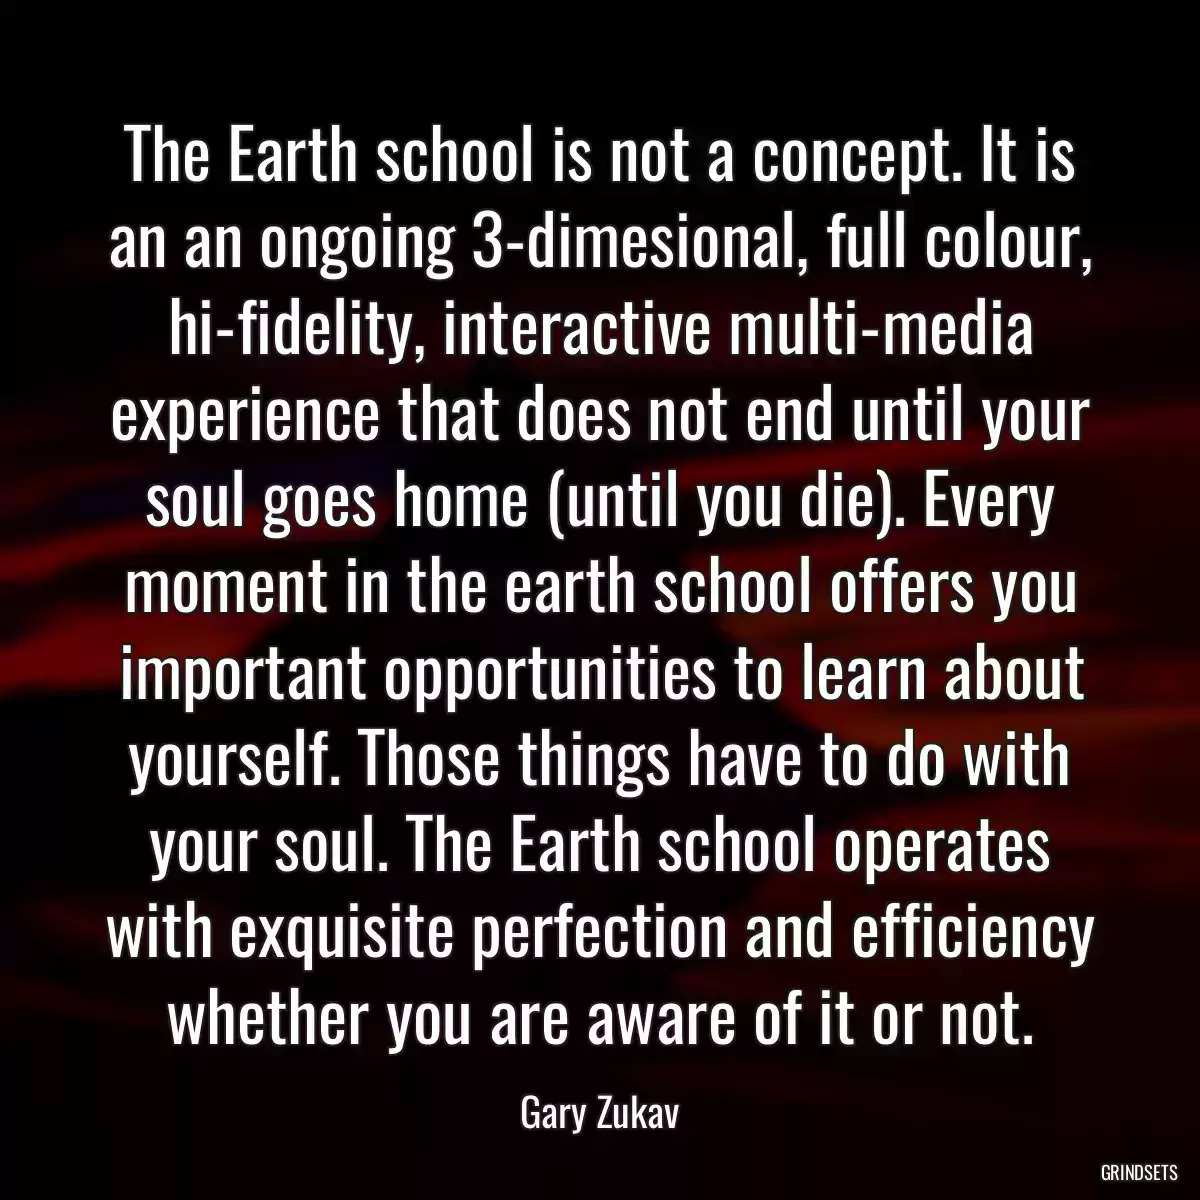 The Earth school is not a concept. It is an an ongoing 3-dimesional, full colour, hi-fidelity, interactive multi-media experience that does not end until your soul goes home (until you die). Every moment in the earth school offers you important opportunities to learn about yourself. Those things have to do with your soul. The Earth school operates with exquisite perfection and efficiency whether you are aware of it or not.